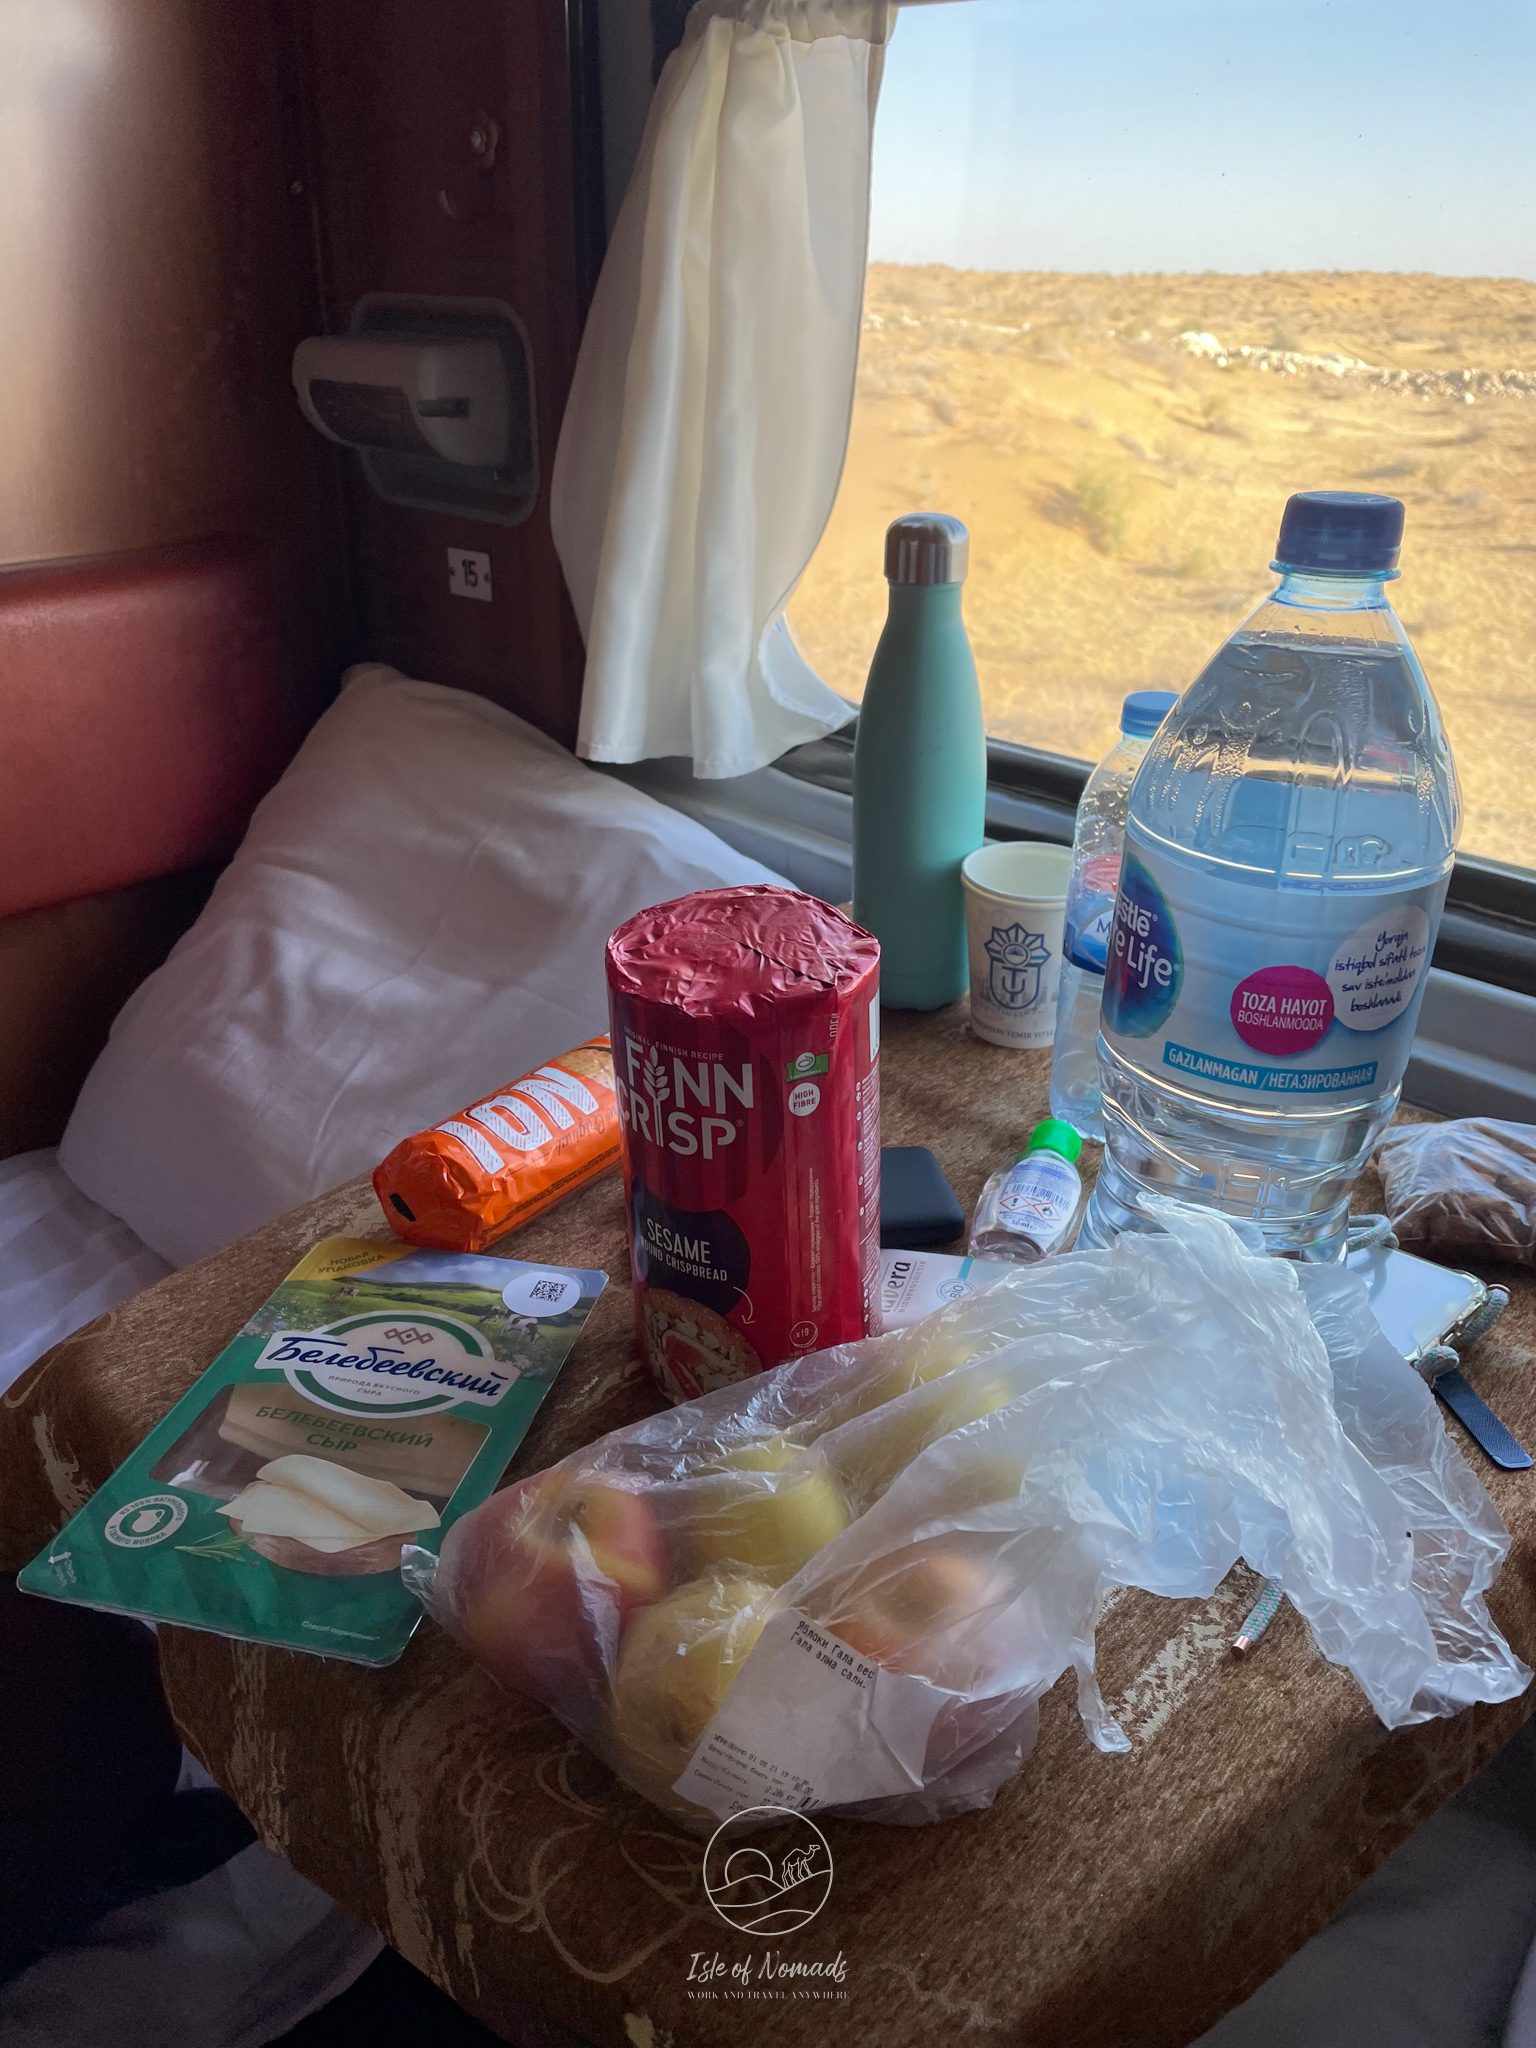 The supplies we bought for the 15h train journey from Tashkent to Khiva